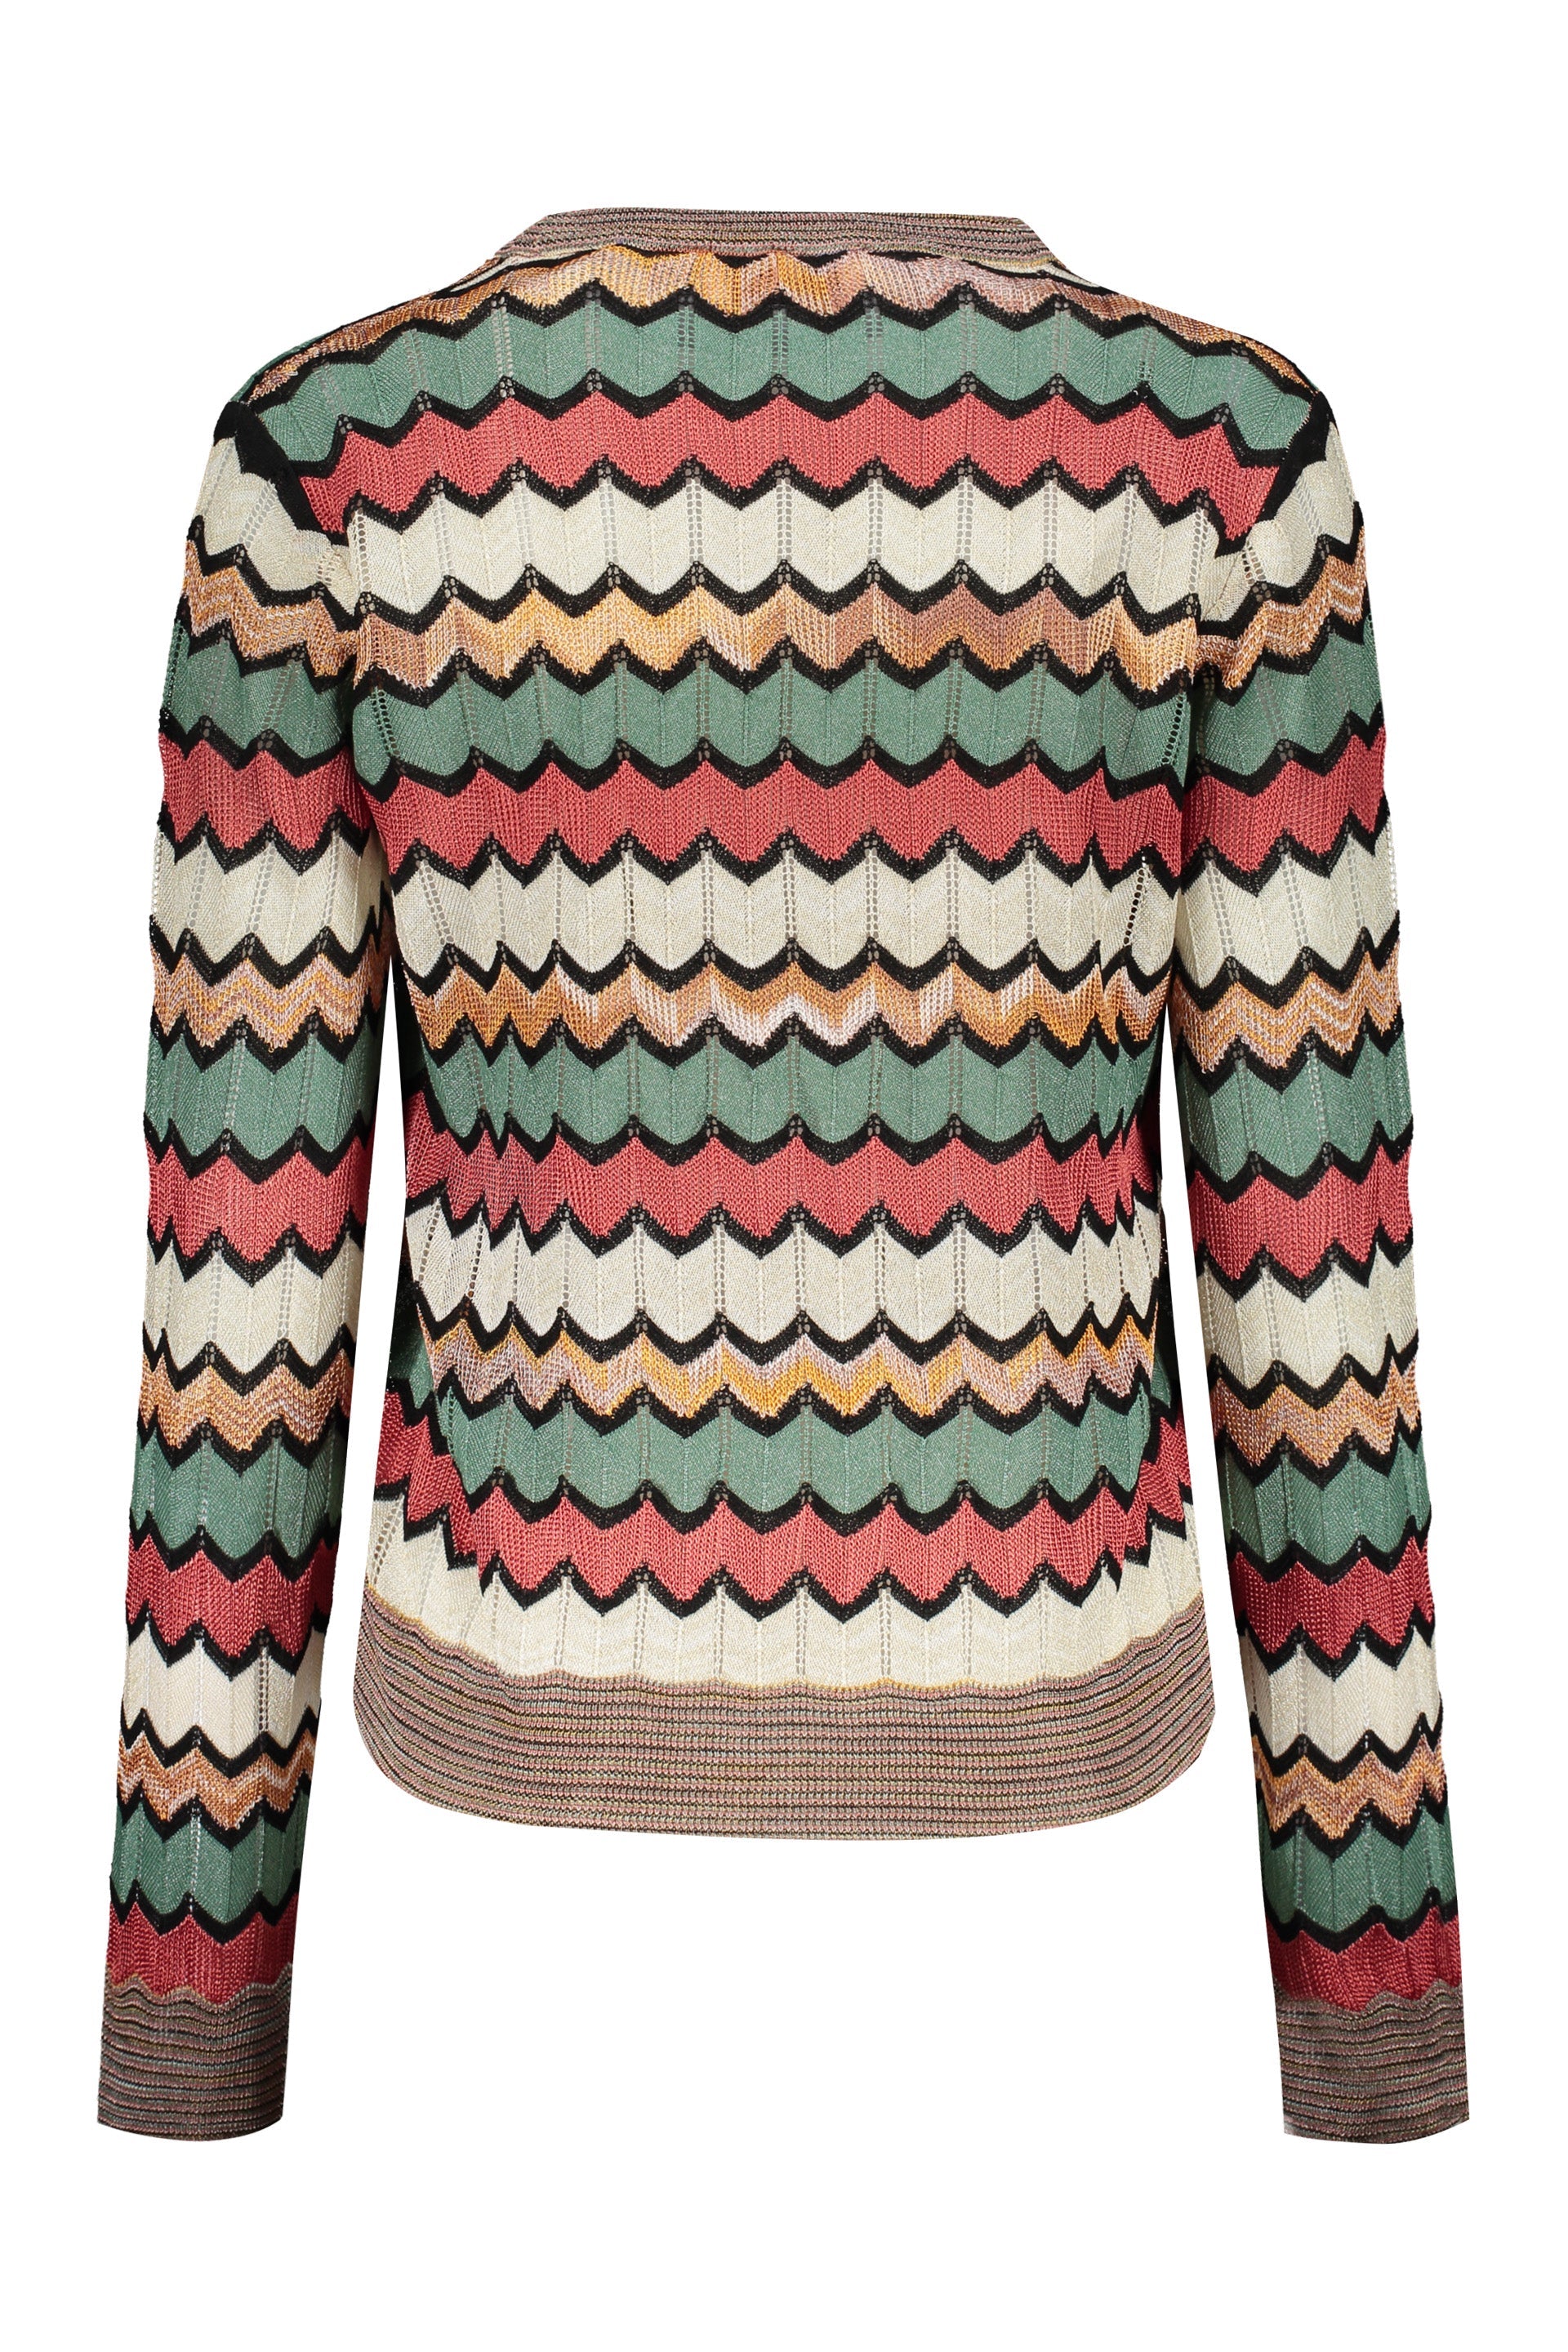 Missoni-OUTLET-SALE-Long-sleeve-crew-neck-sweater-Strick-ARCHIVE-COLLECTION-2.jpg